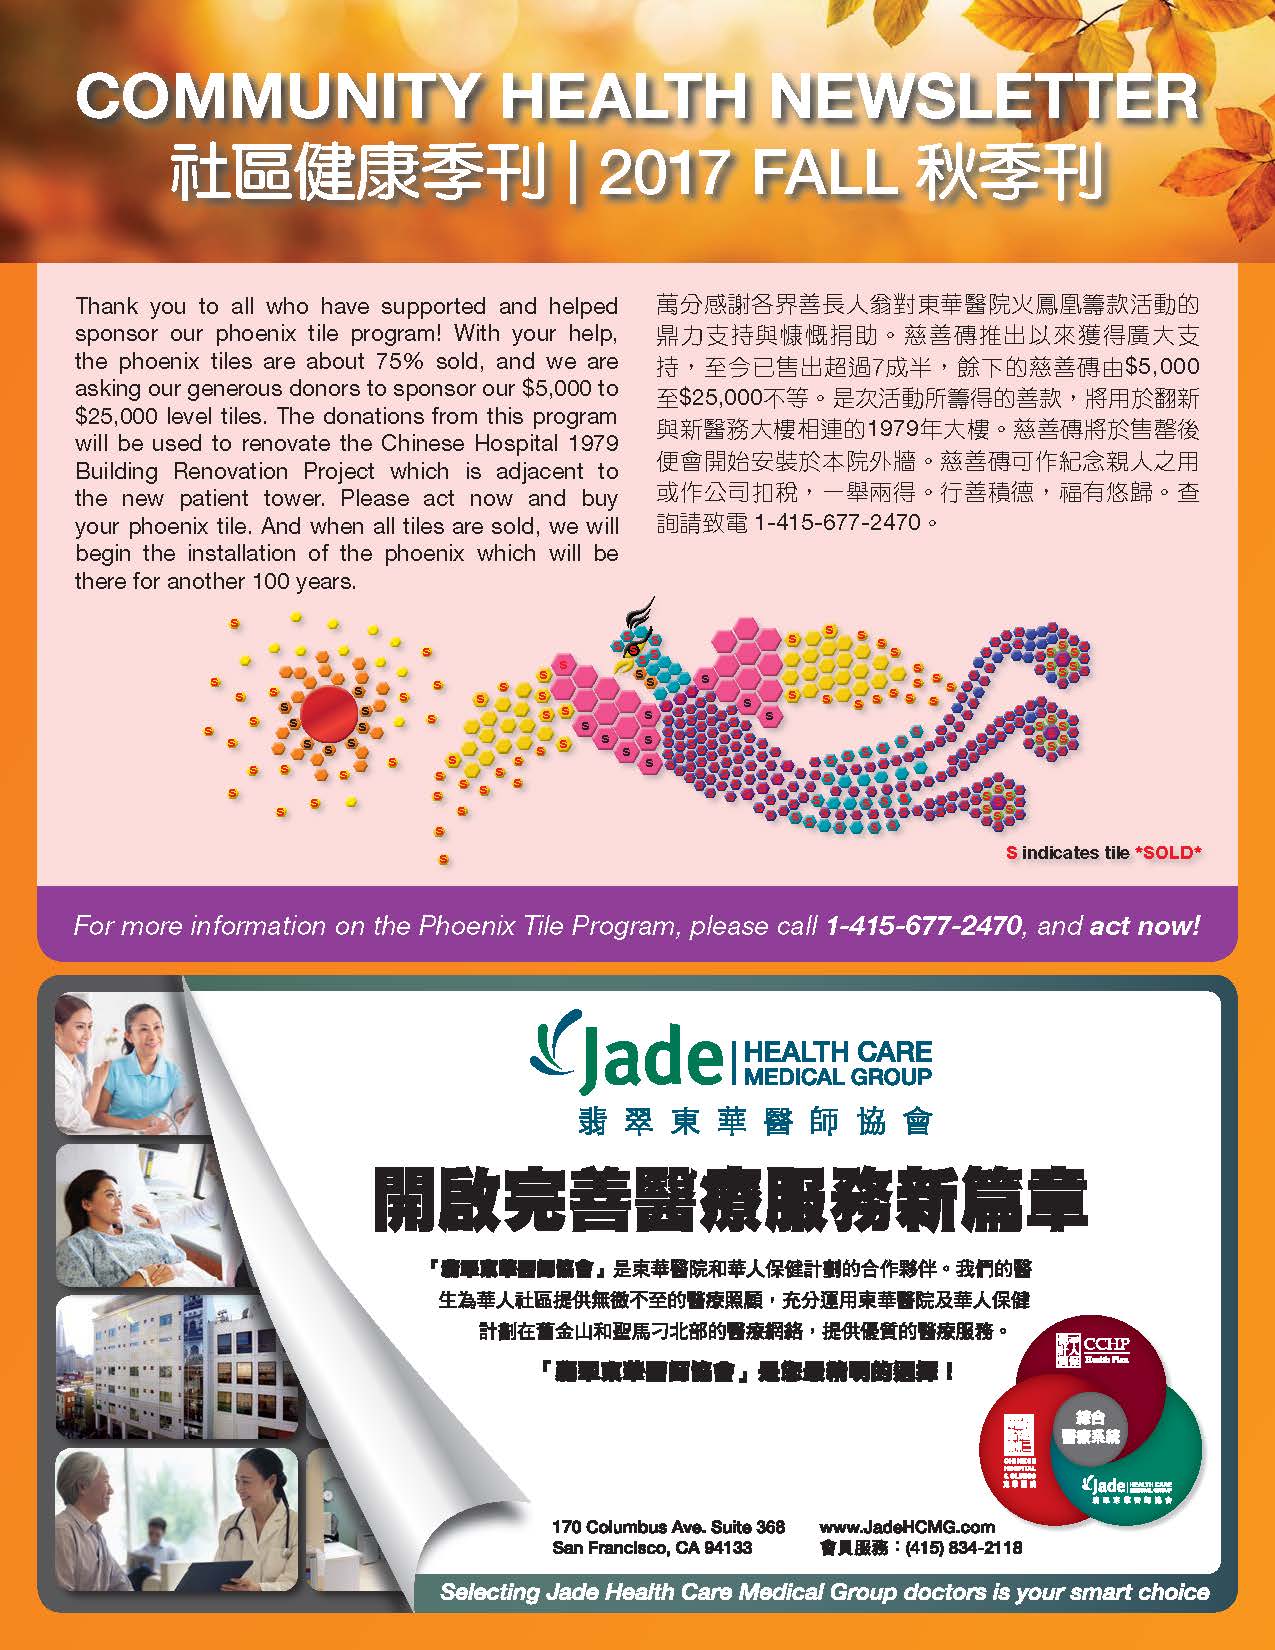 CCHP 2017 fall newsletter, information of Chinese Hospital